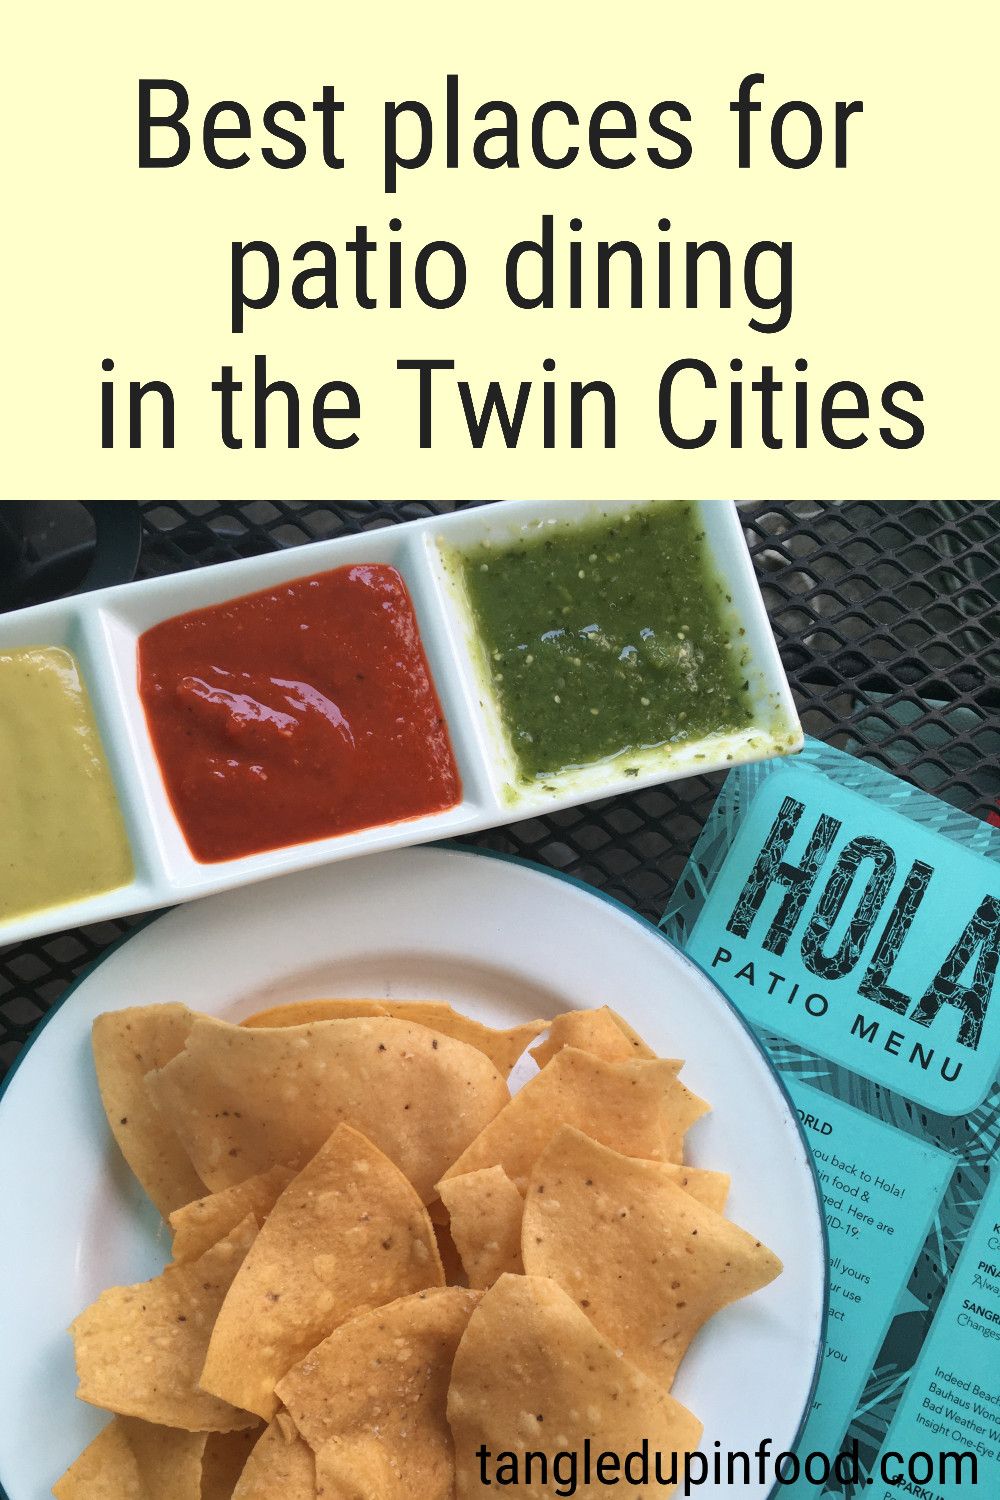 Chips and salsa with text reading "Best Places for Patio Dining in the Twin Cities"